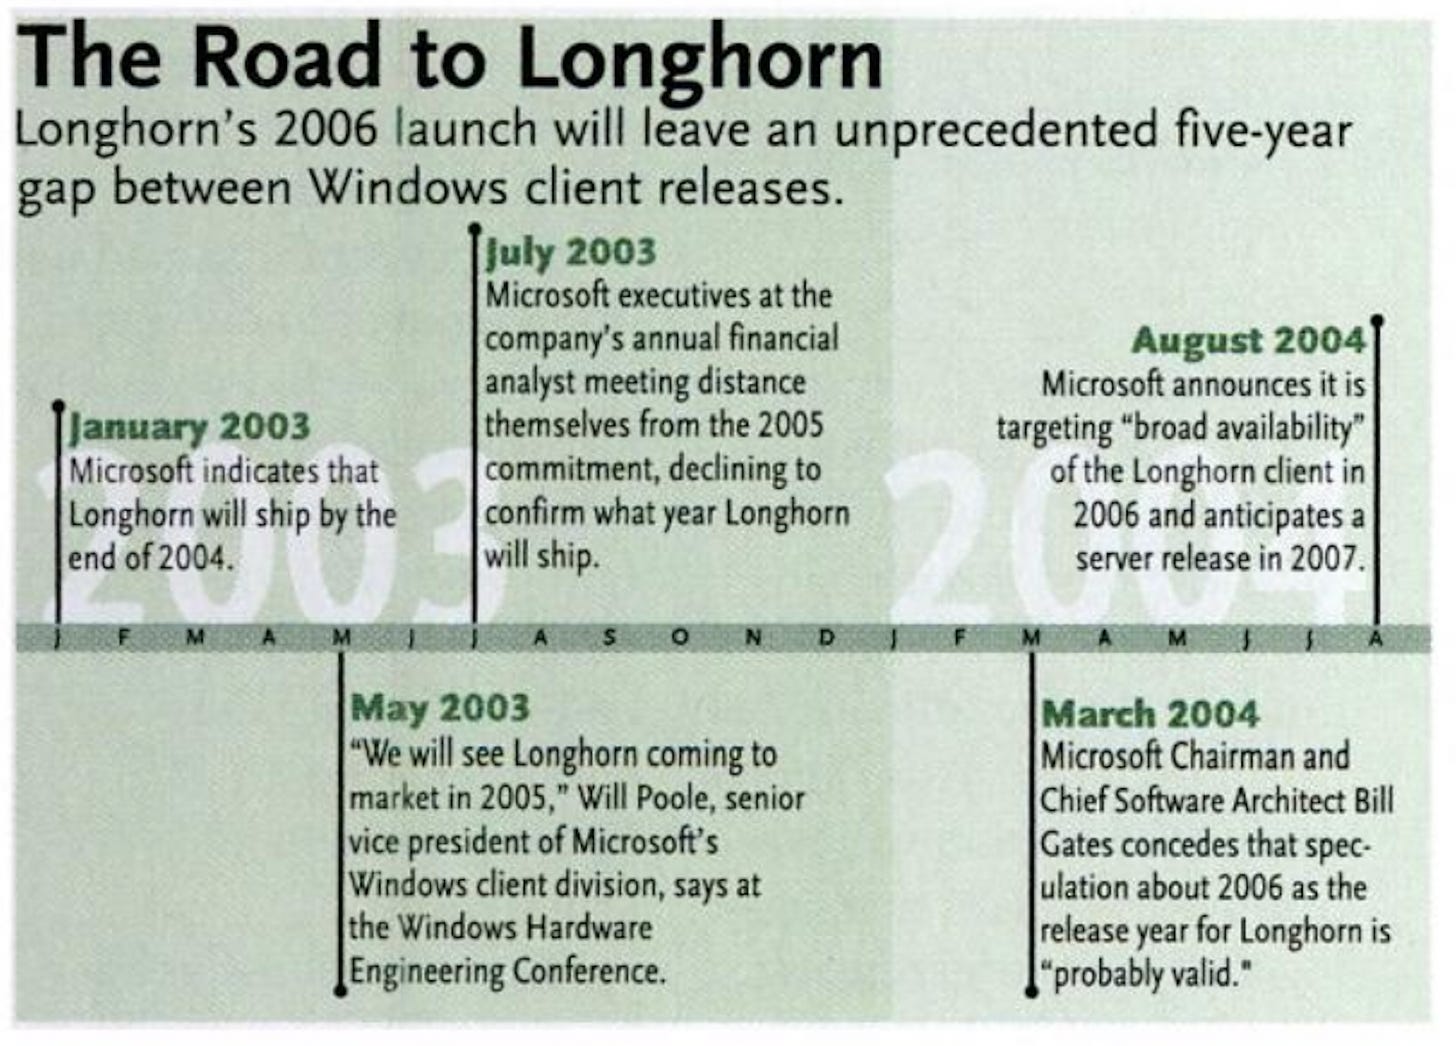 The Road to Longhorn Longhorn's 2006 launch will leave an unprecedented five-year gap between Windows client releases. fluly 2003 Microsoft executives at the company's annual financial analyst meeting distance January 2003 Microsoft indicates that Longhorn will ship by the end of 2004. I themselves from the 2005 commitment, declining to confirm what year Longhorn will ship. August 2004 Microsoft announces it is targeting "broad availability of the Longhorn client in 2006 and anticipates a server release in 2007. F. M M I A S O \May 2003 "We will see Longhorn coming to market in 2005," Will Poole, senior I vice president of Microsoft's Windows client division, says at the Windows Hardware Engineering Conference. D F M A M I. March 2004 Microsoft Chairman and Chief Software Architect Bill Gates concedes that spec- ulation about 2006 as the release year for Longhorn is "probably valid."